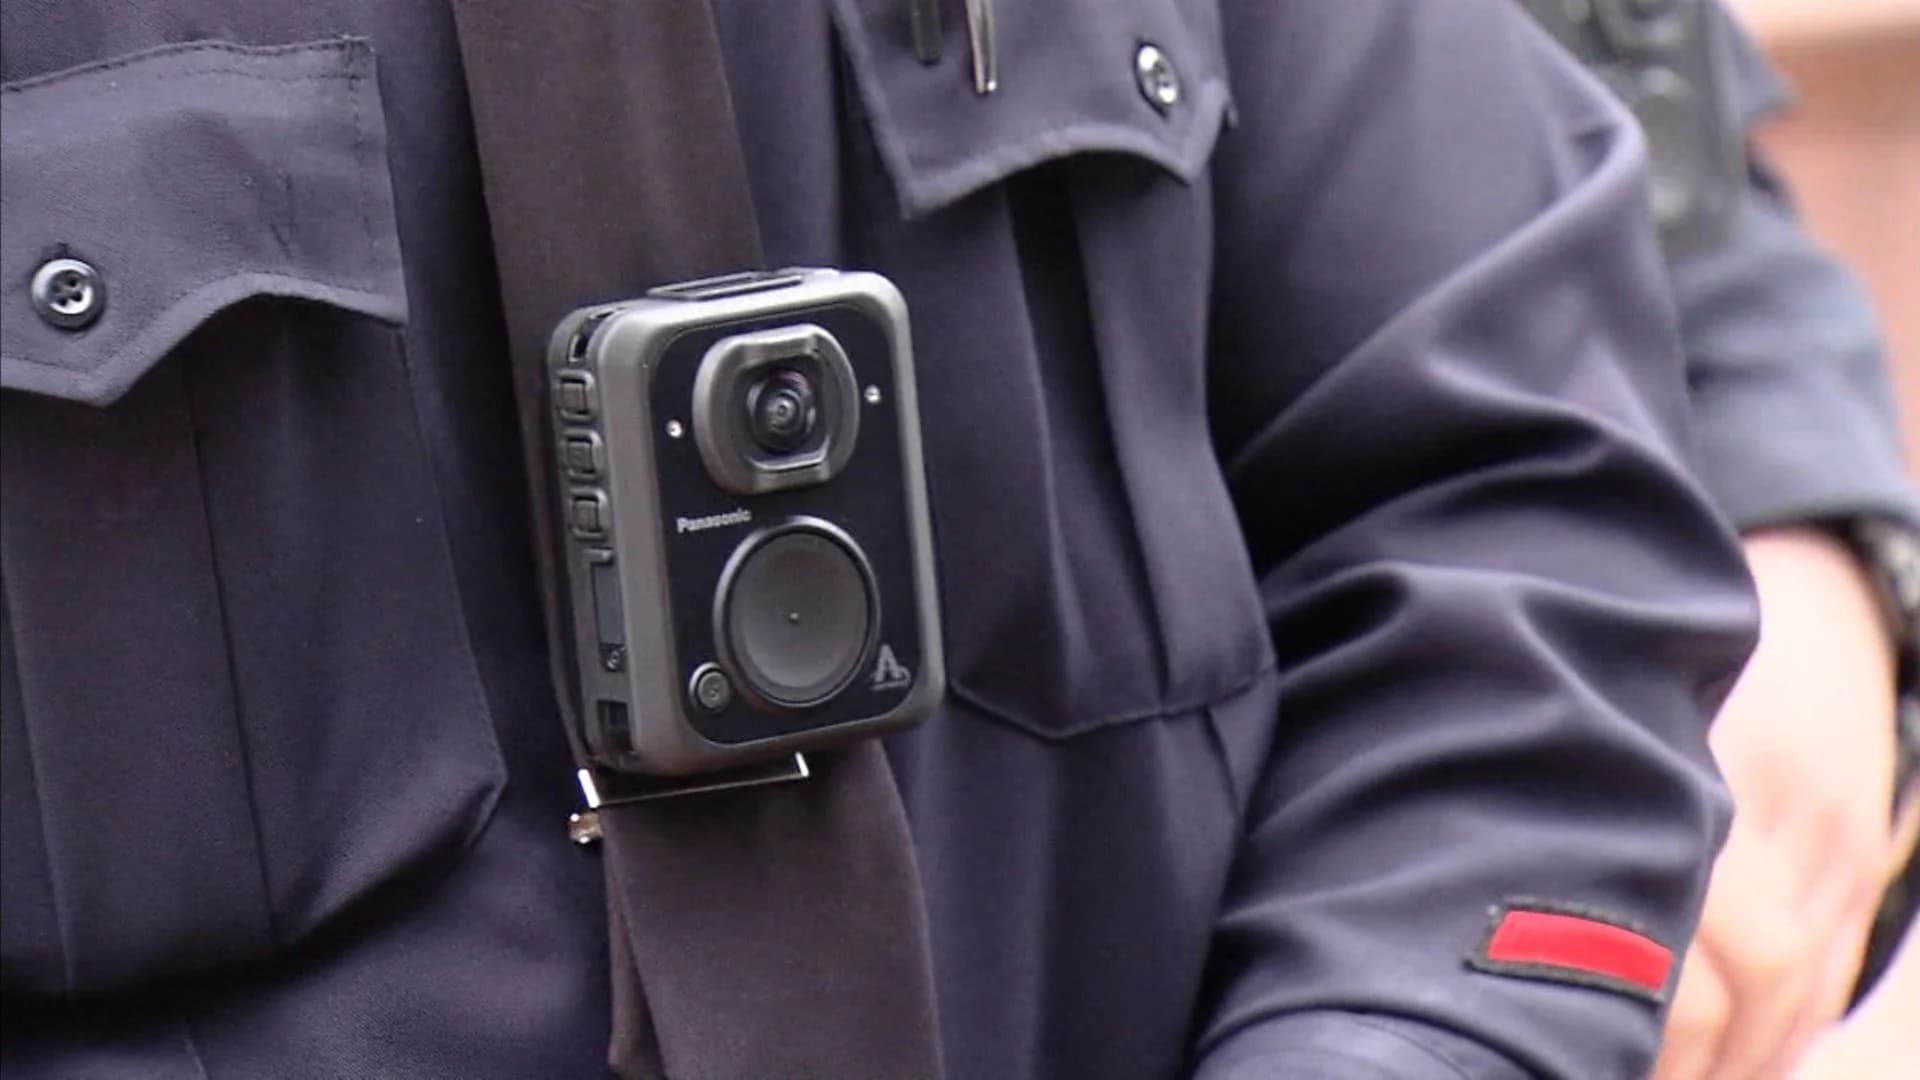 Some Newark police officers to begin using body cameras next week